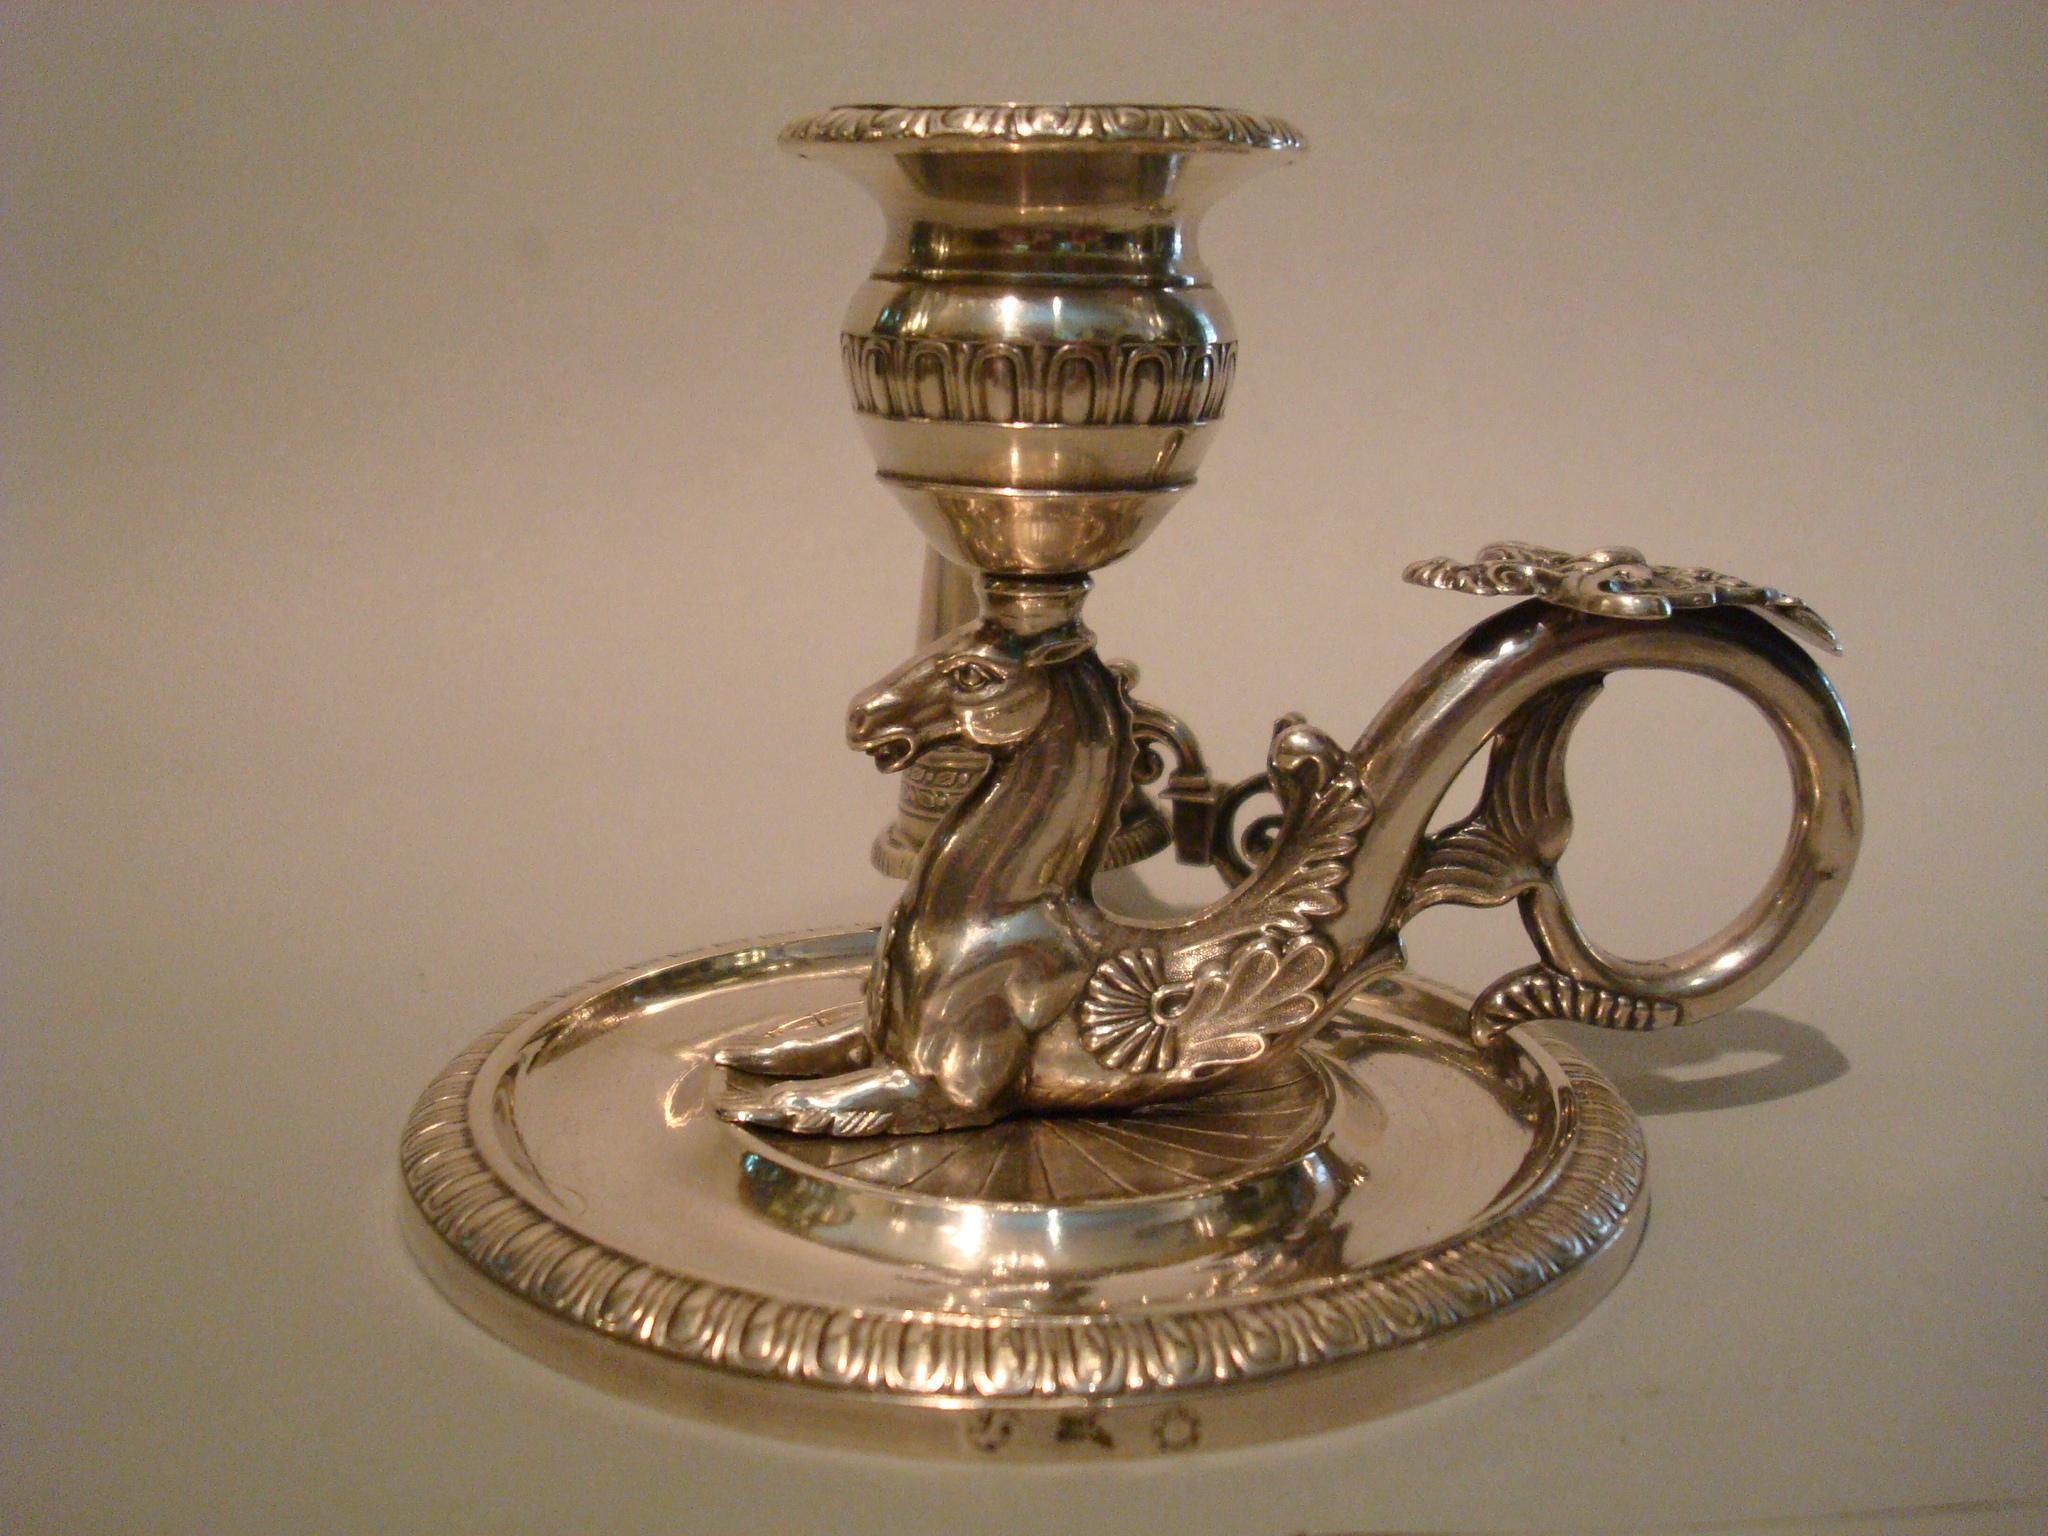 Silver Chamberstick / candleholder hippocampus / seahorse, circa 1837 Munich, Germany.
This silver Chamberstick retain the original detachable snuffer.
         